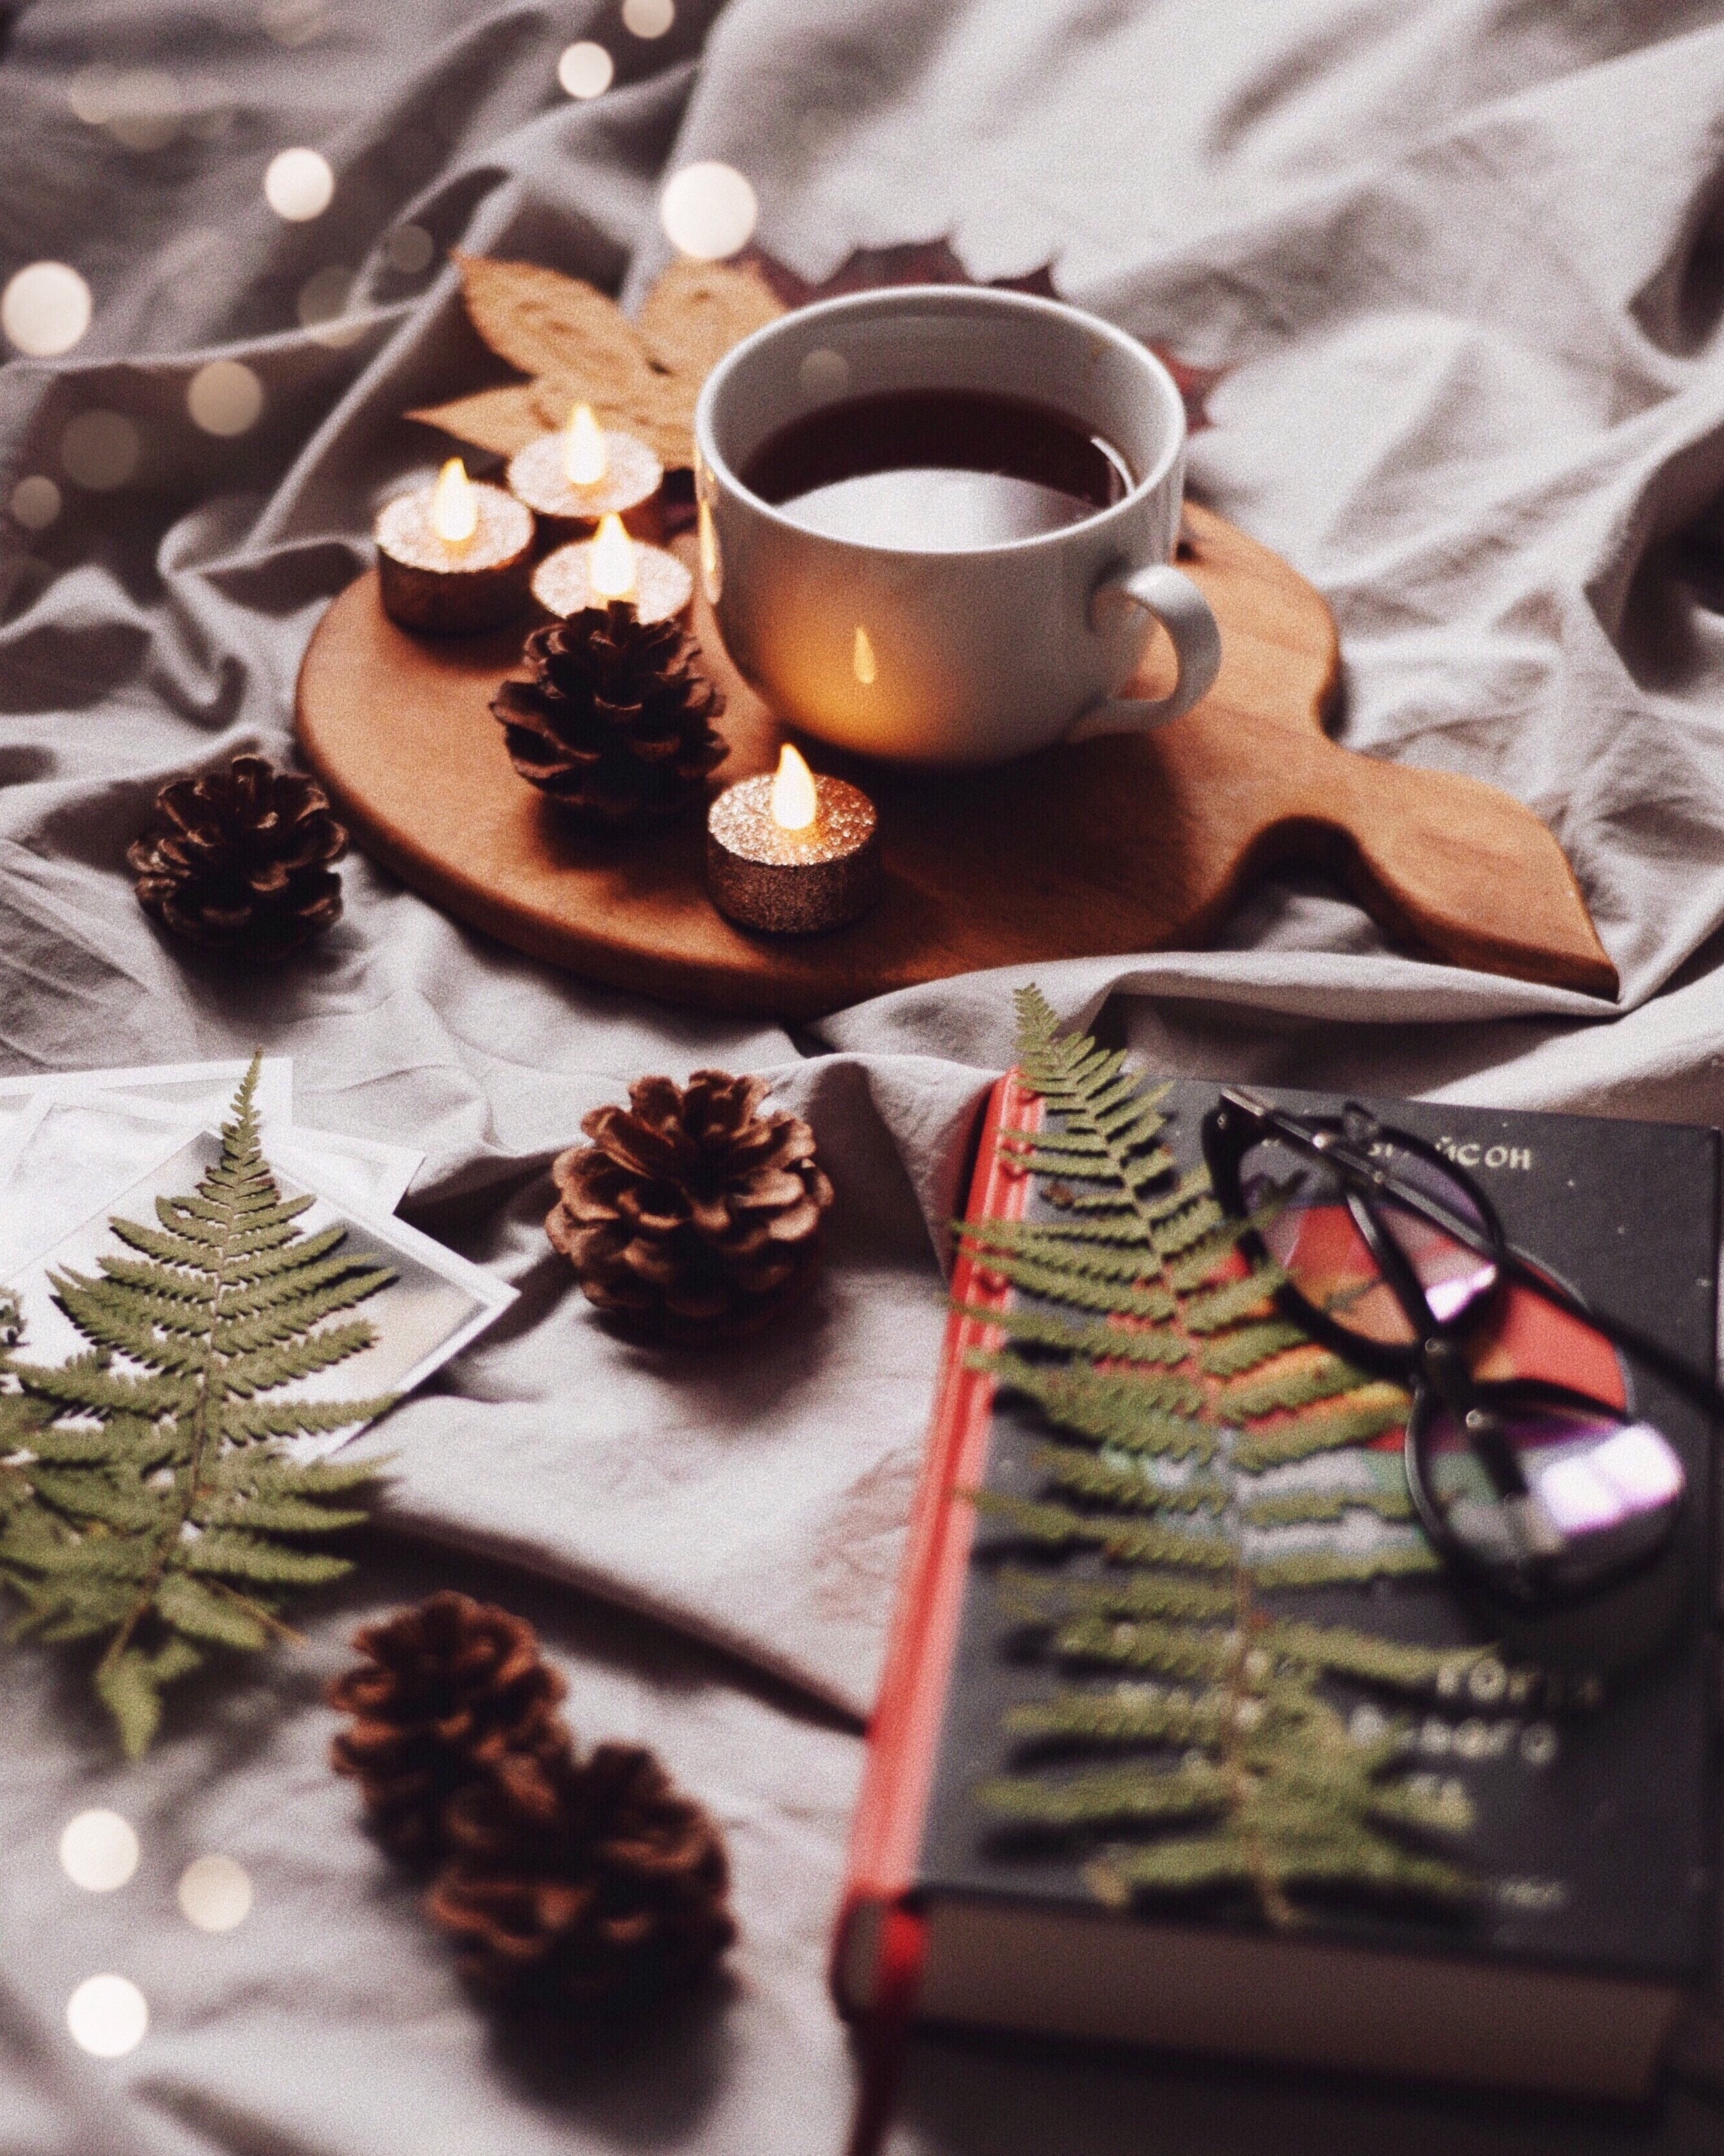 Download background cones, candles, coffee, miscellanea, miscellaneous, cup, book, drink, beverage, coziness, comfort